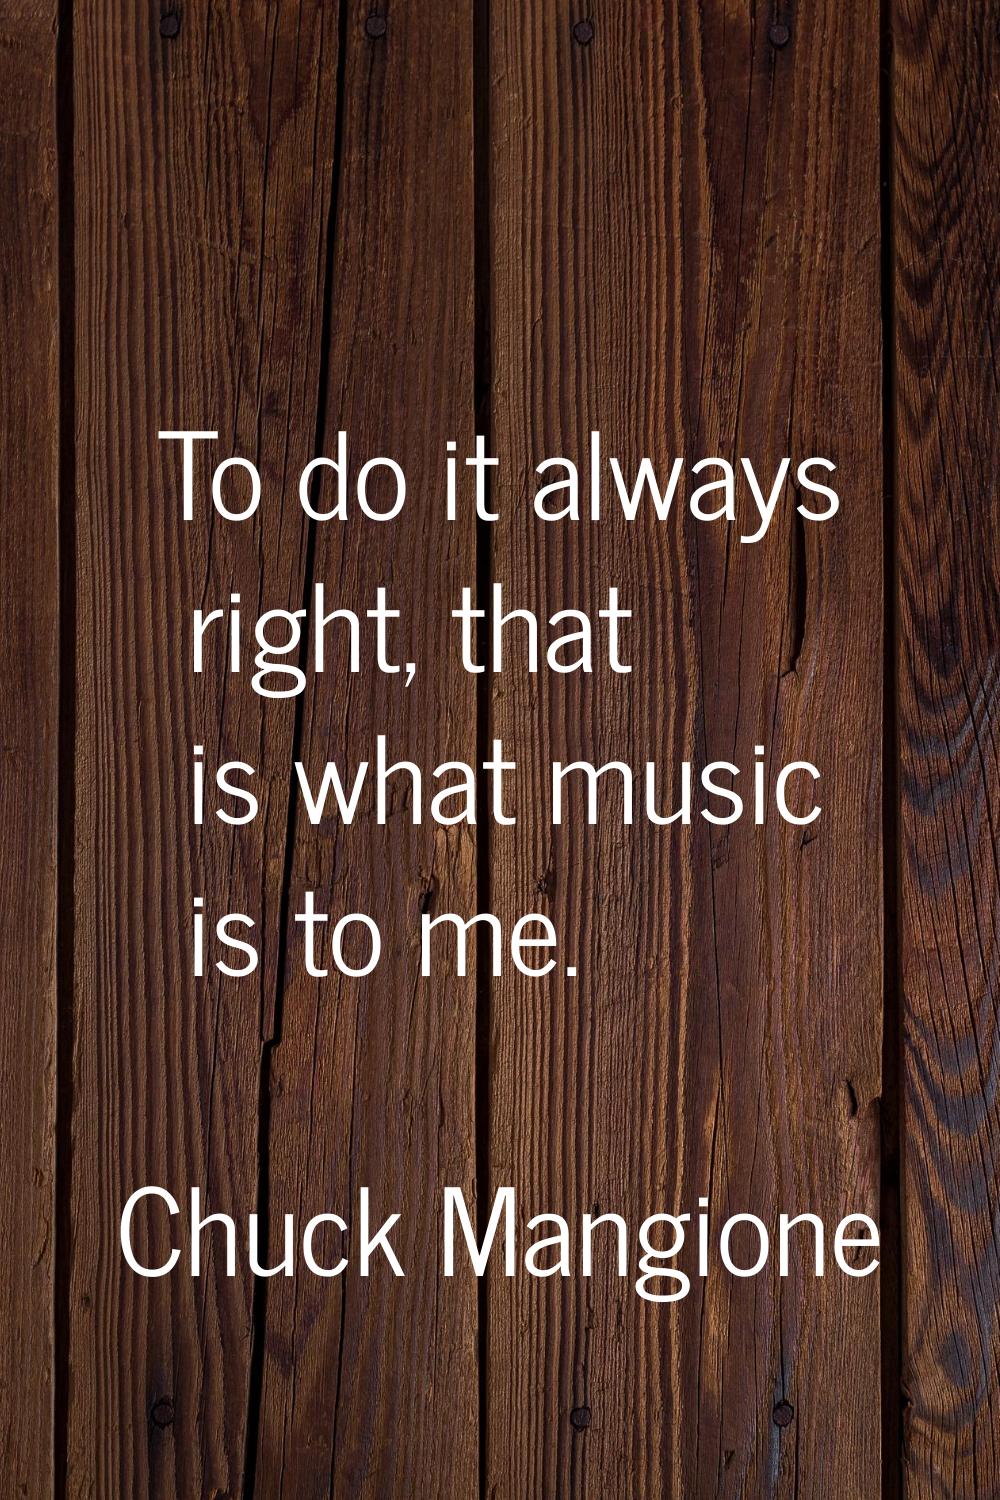 To do it always right, that is what music is to me.